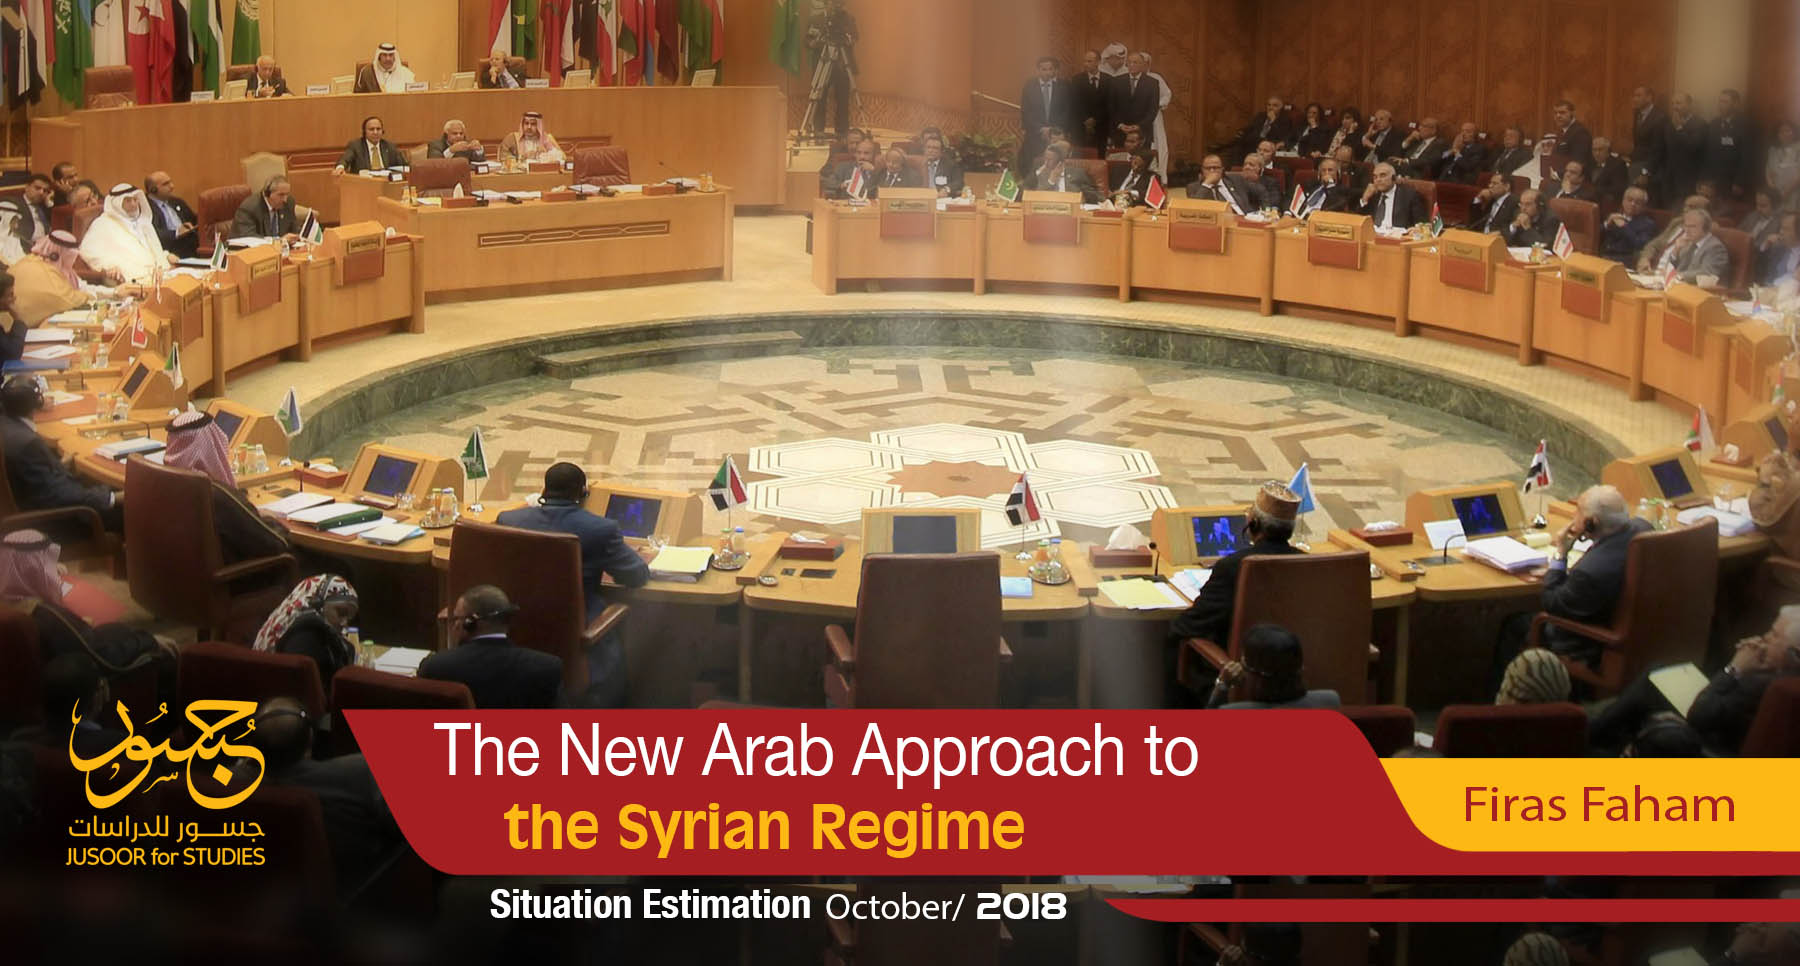 The New Arab Approach to the Syrian Regime